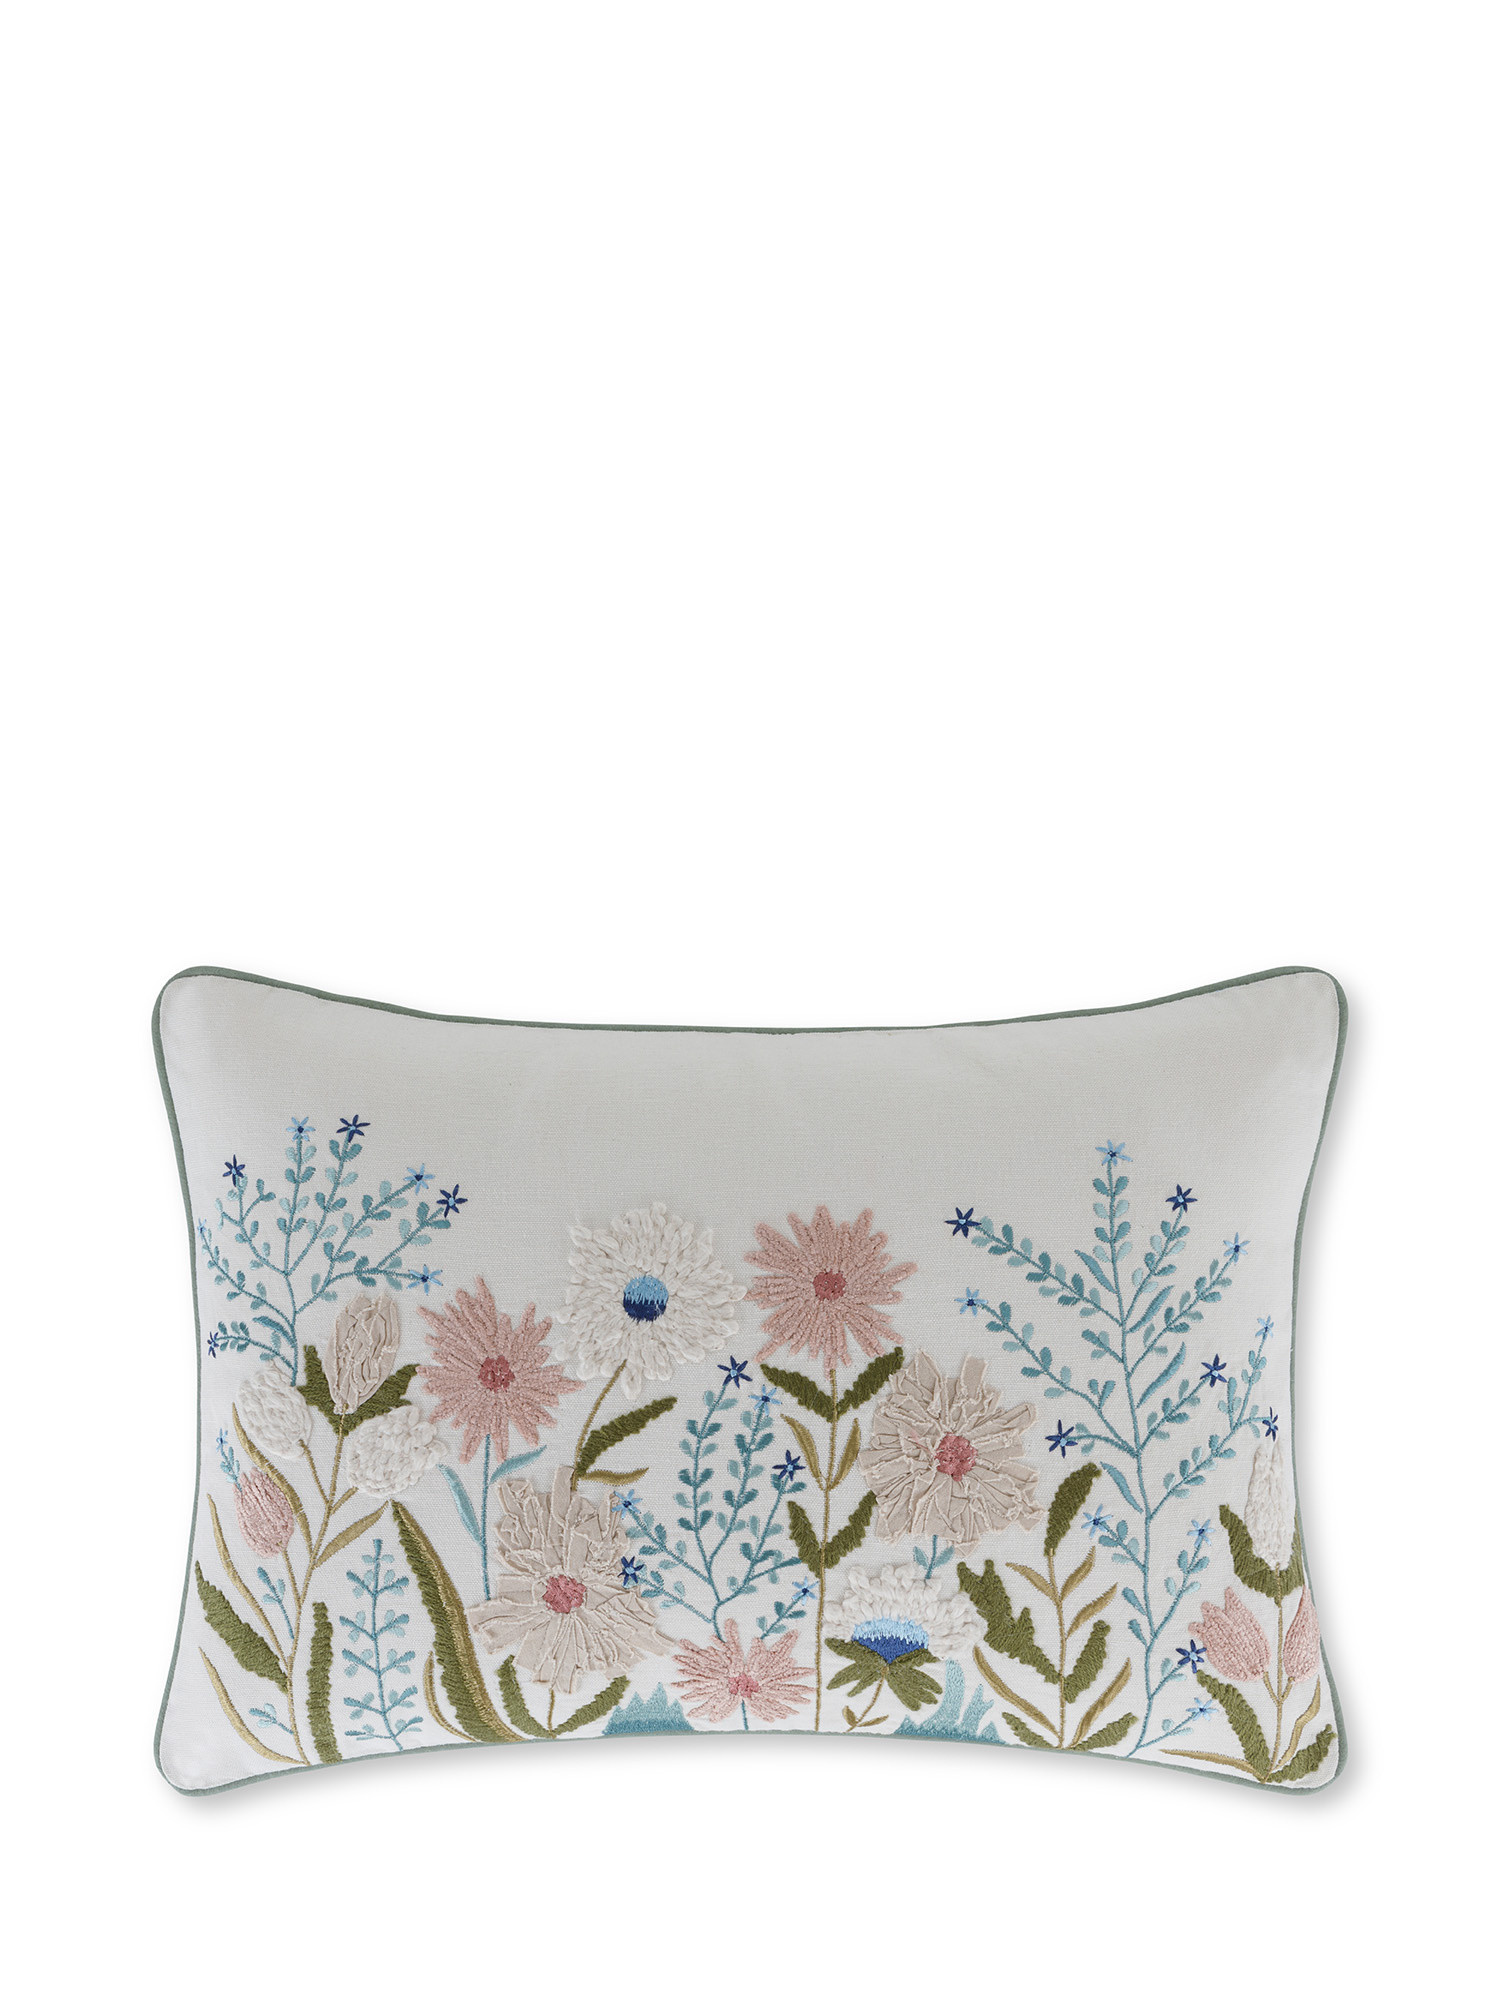 Cushion with embroidered flowers 35x50 cm, White, large image number 0